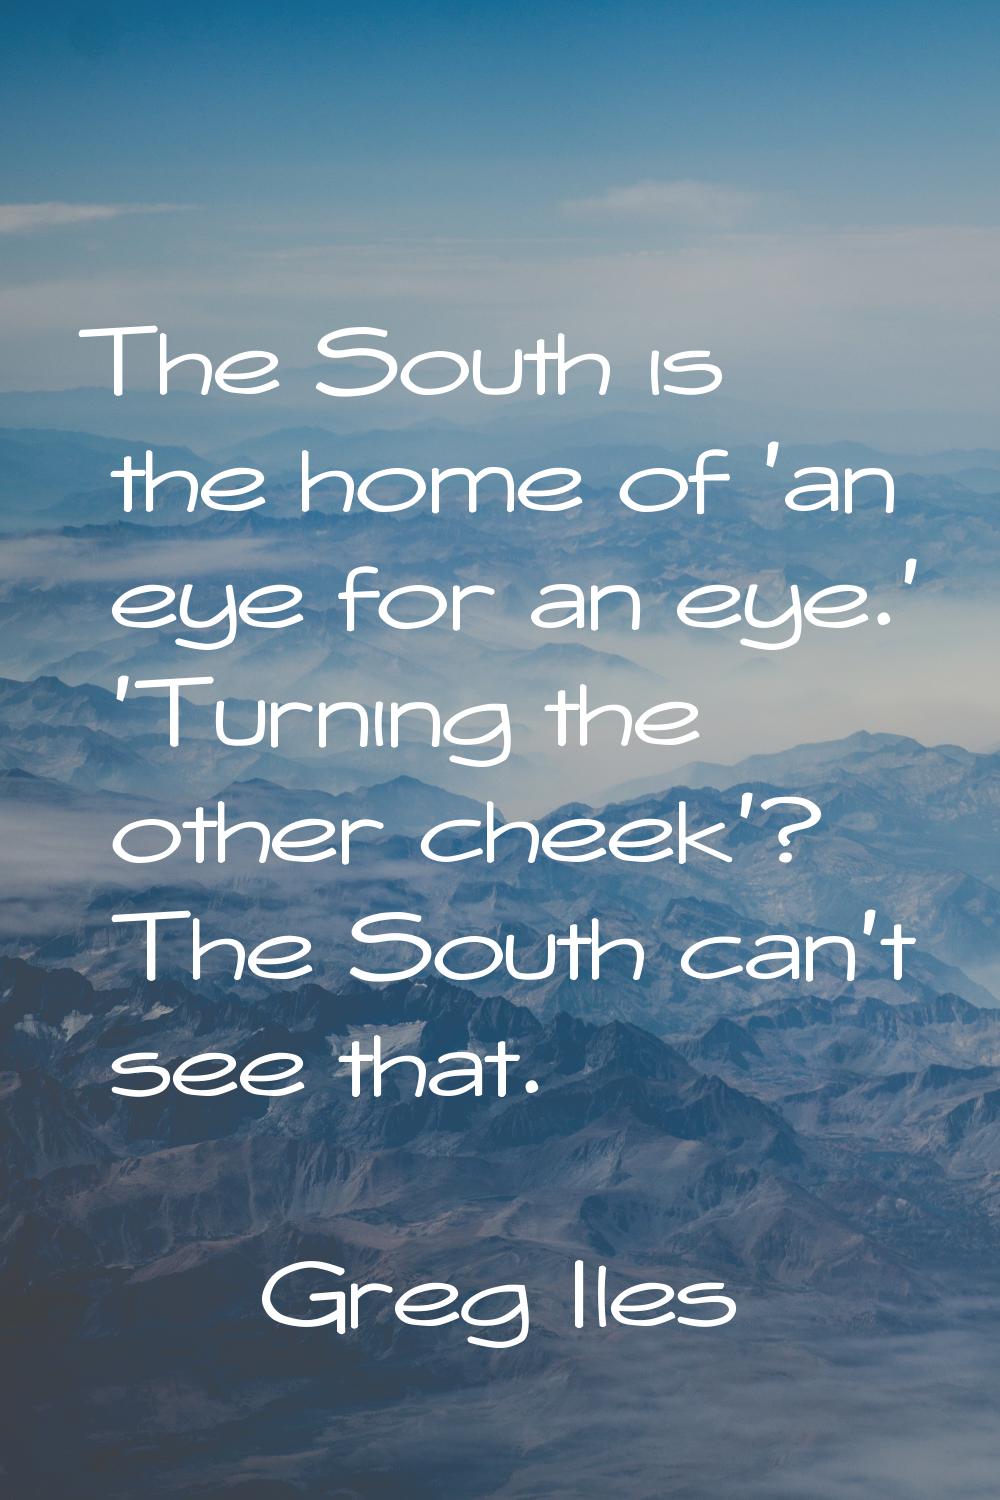 The South is the home of 'an eye for an eye.' 'Turning the other cheek'? The South can't see that.